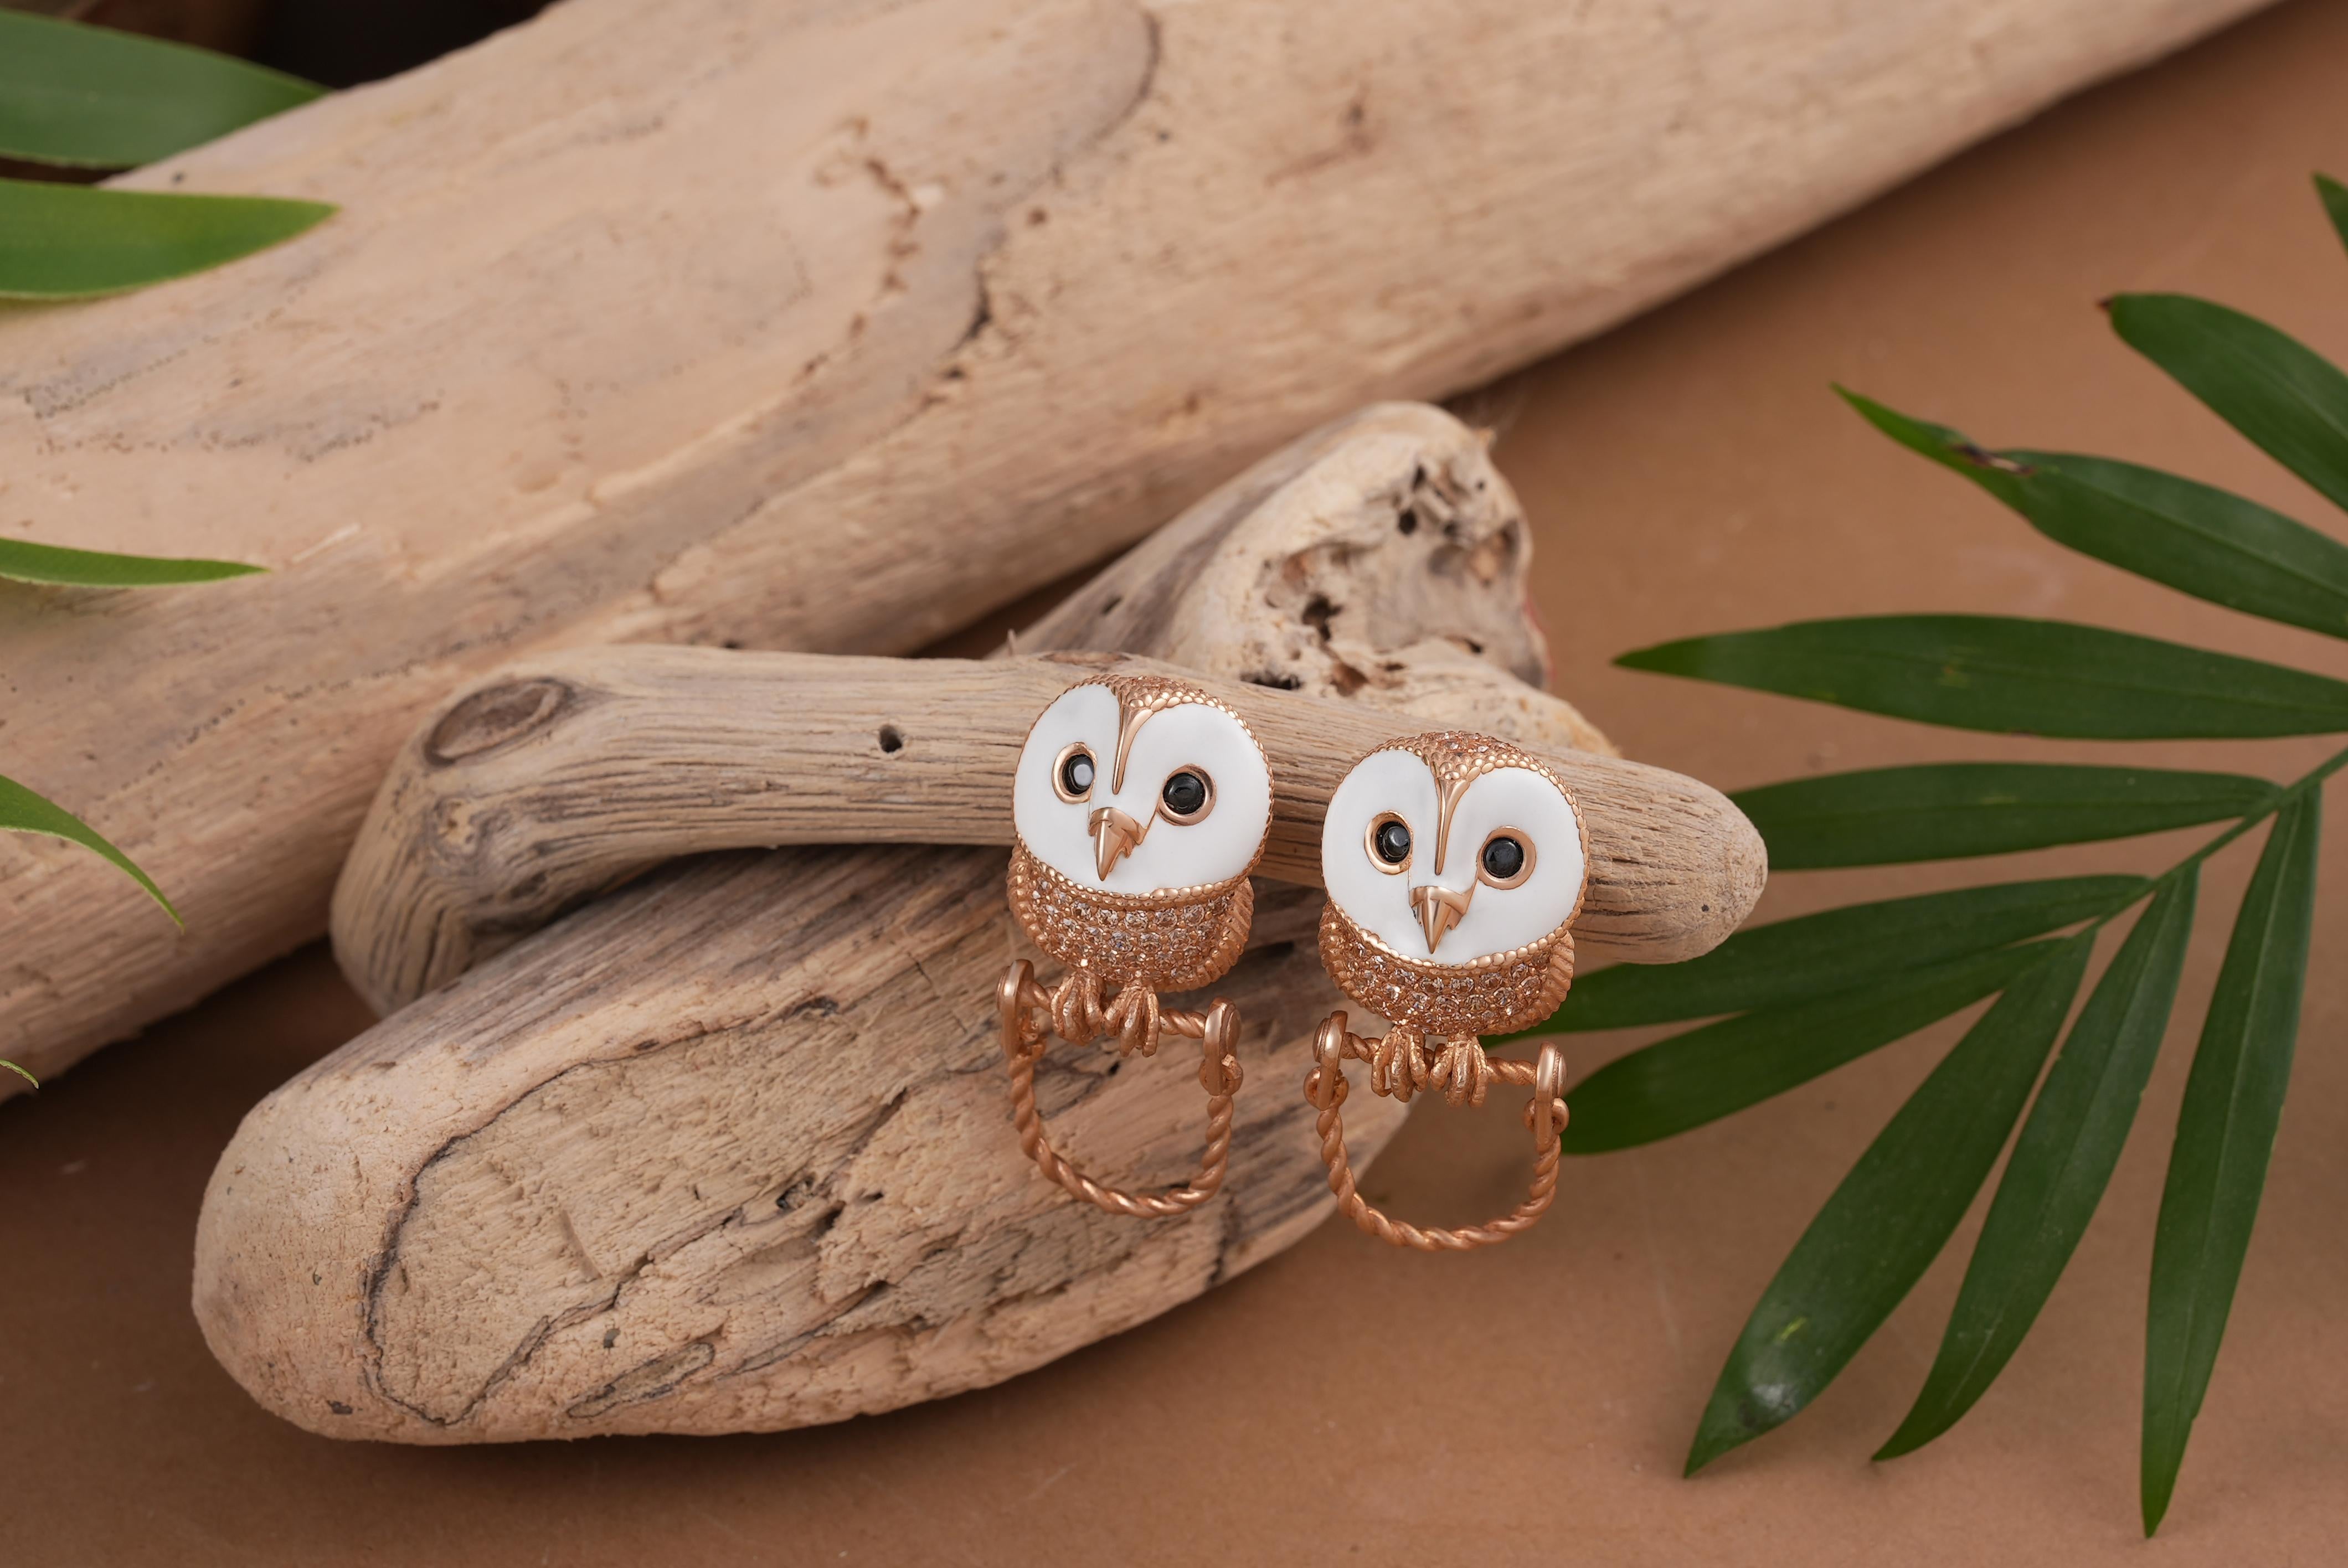 The barn owl is recognized for its unique heart-shaped face and silent flight, making it a cherished symbol of wisdom and enigma. These earrings beautifully embody the essence of the barn owl through their meticulous design and meticulous attention